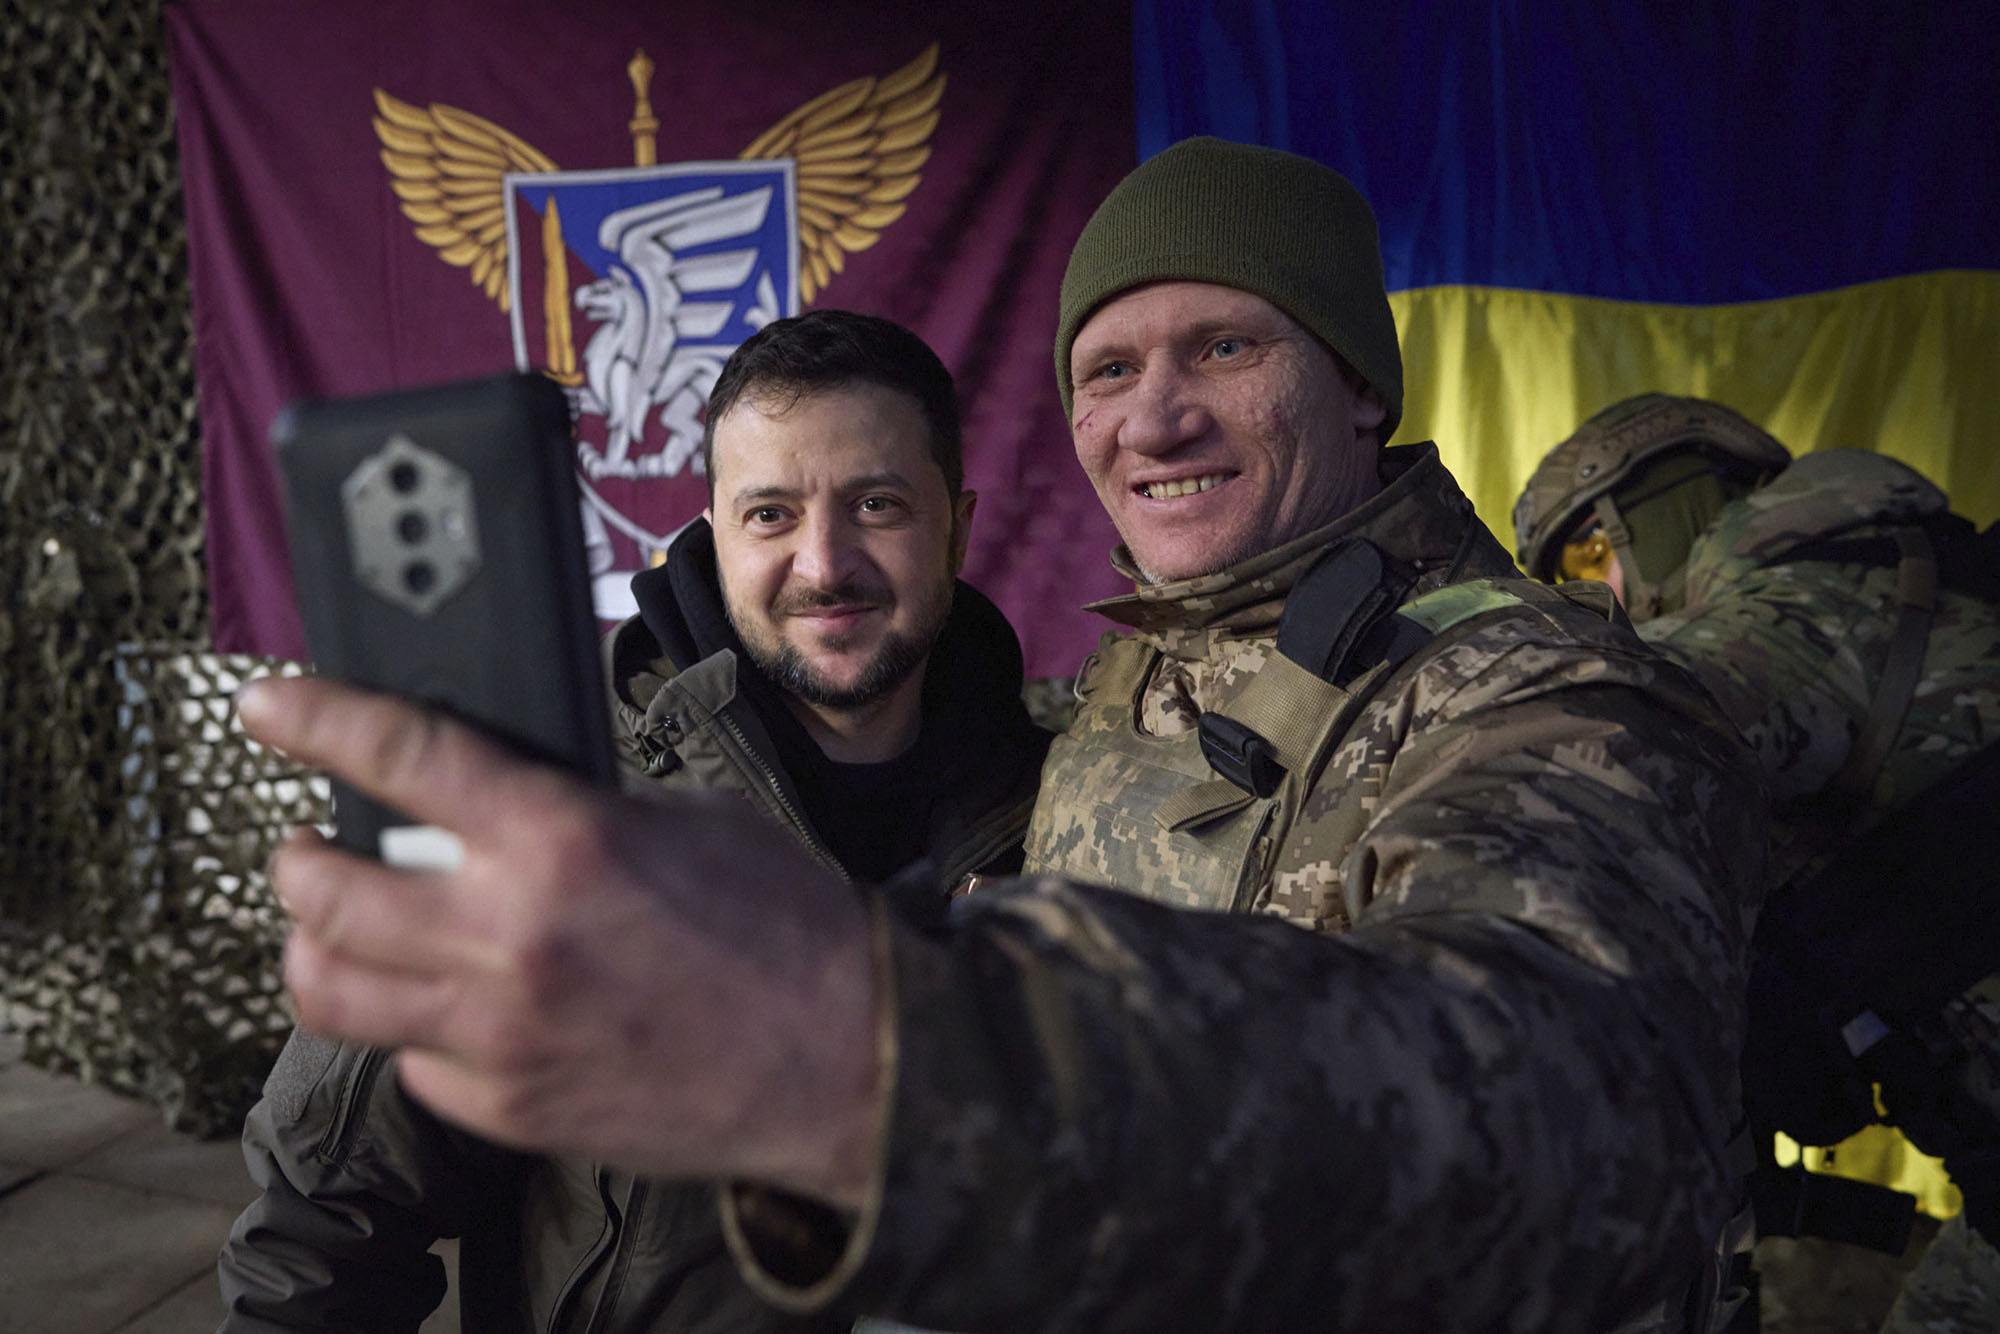 A Ukrainian soldier takes a selfie with President Volodymyr Zelensky, left, during his visit to Sloviansk in the Donbas region, Ukraine, on December 6.